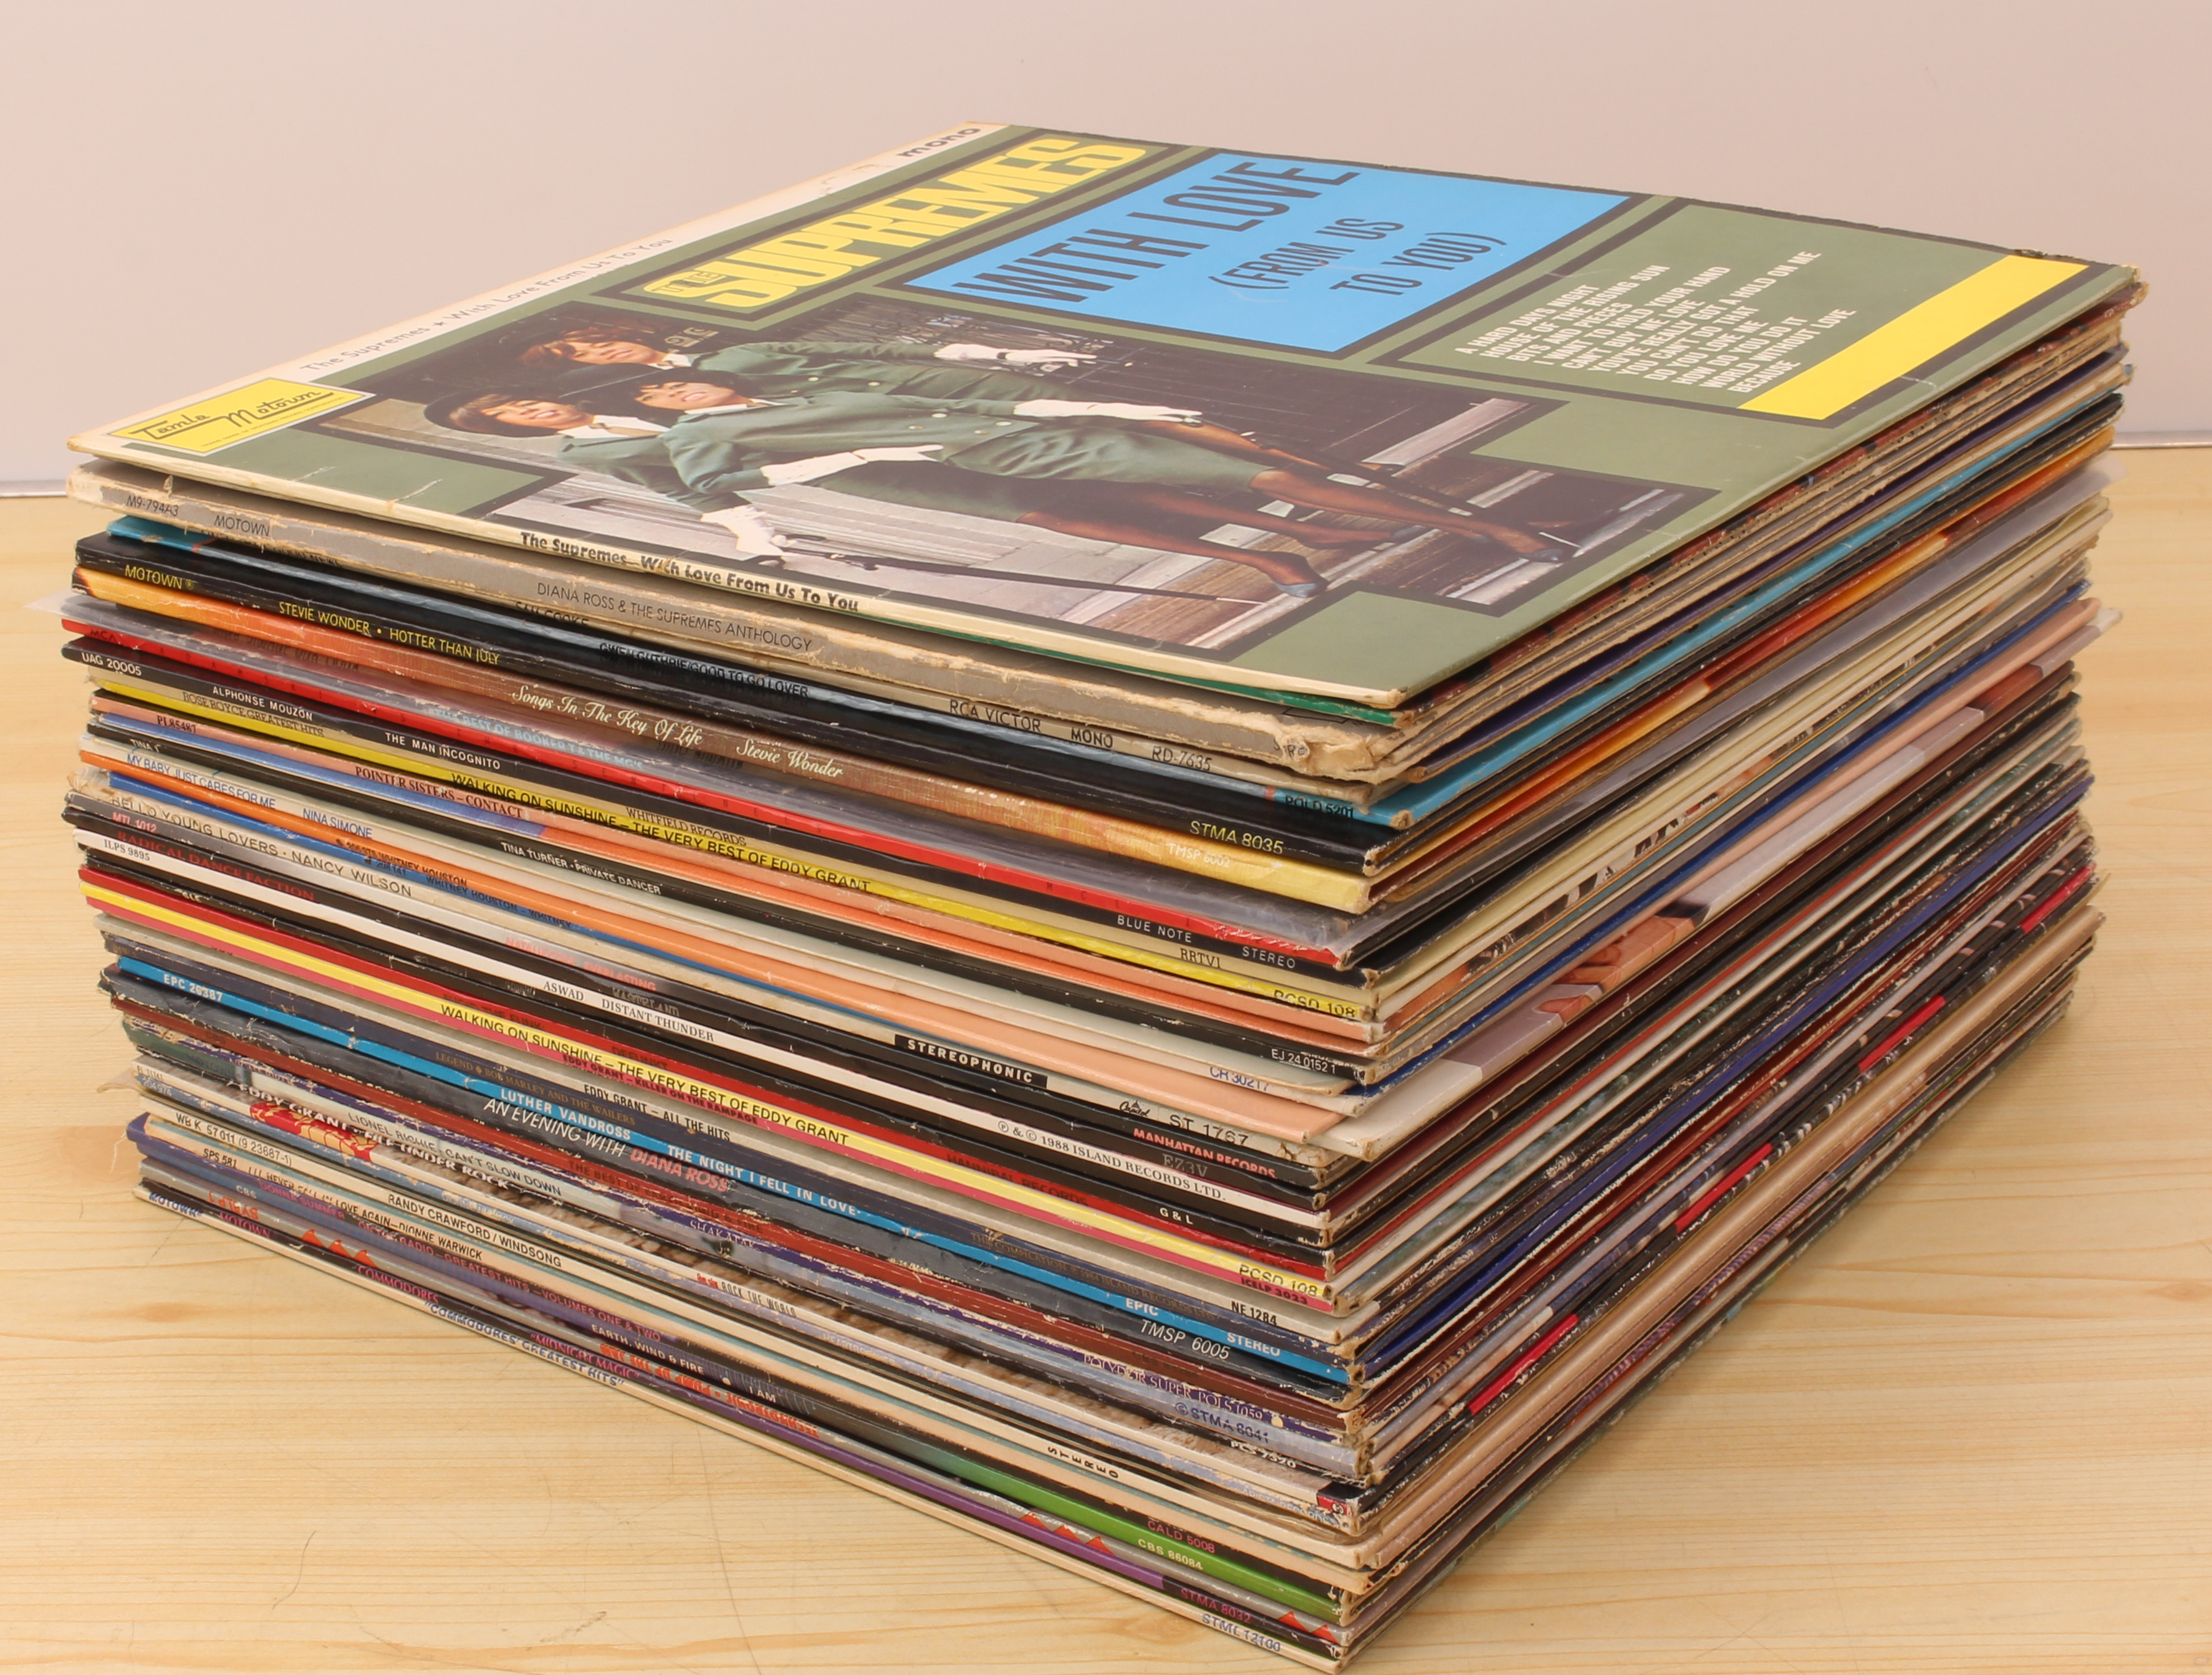 53 Soul/Funk/Disco/Reggae albums and 7 12" singles to include: The Supremes; Sam Cooke; Stevie